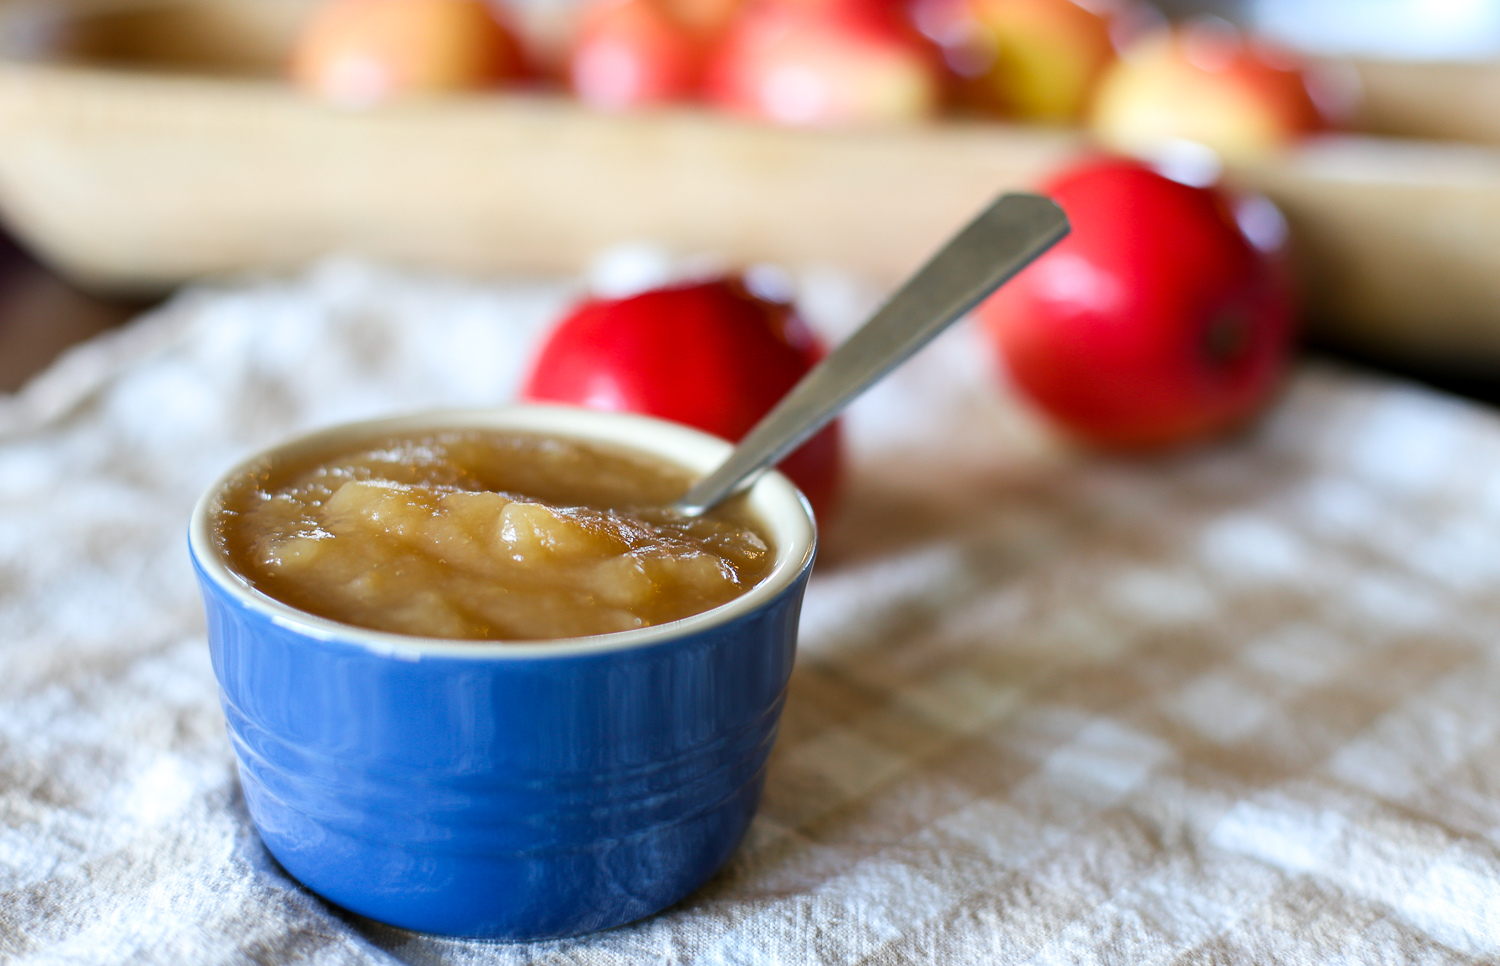 Homemade cinnamon apple sauce in a blue bowl with a spoon.